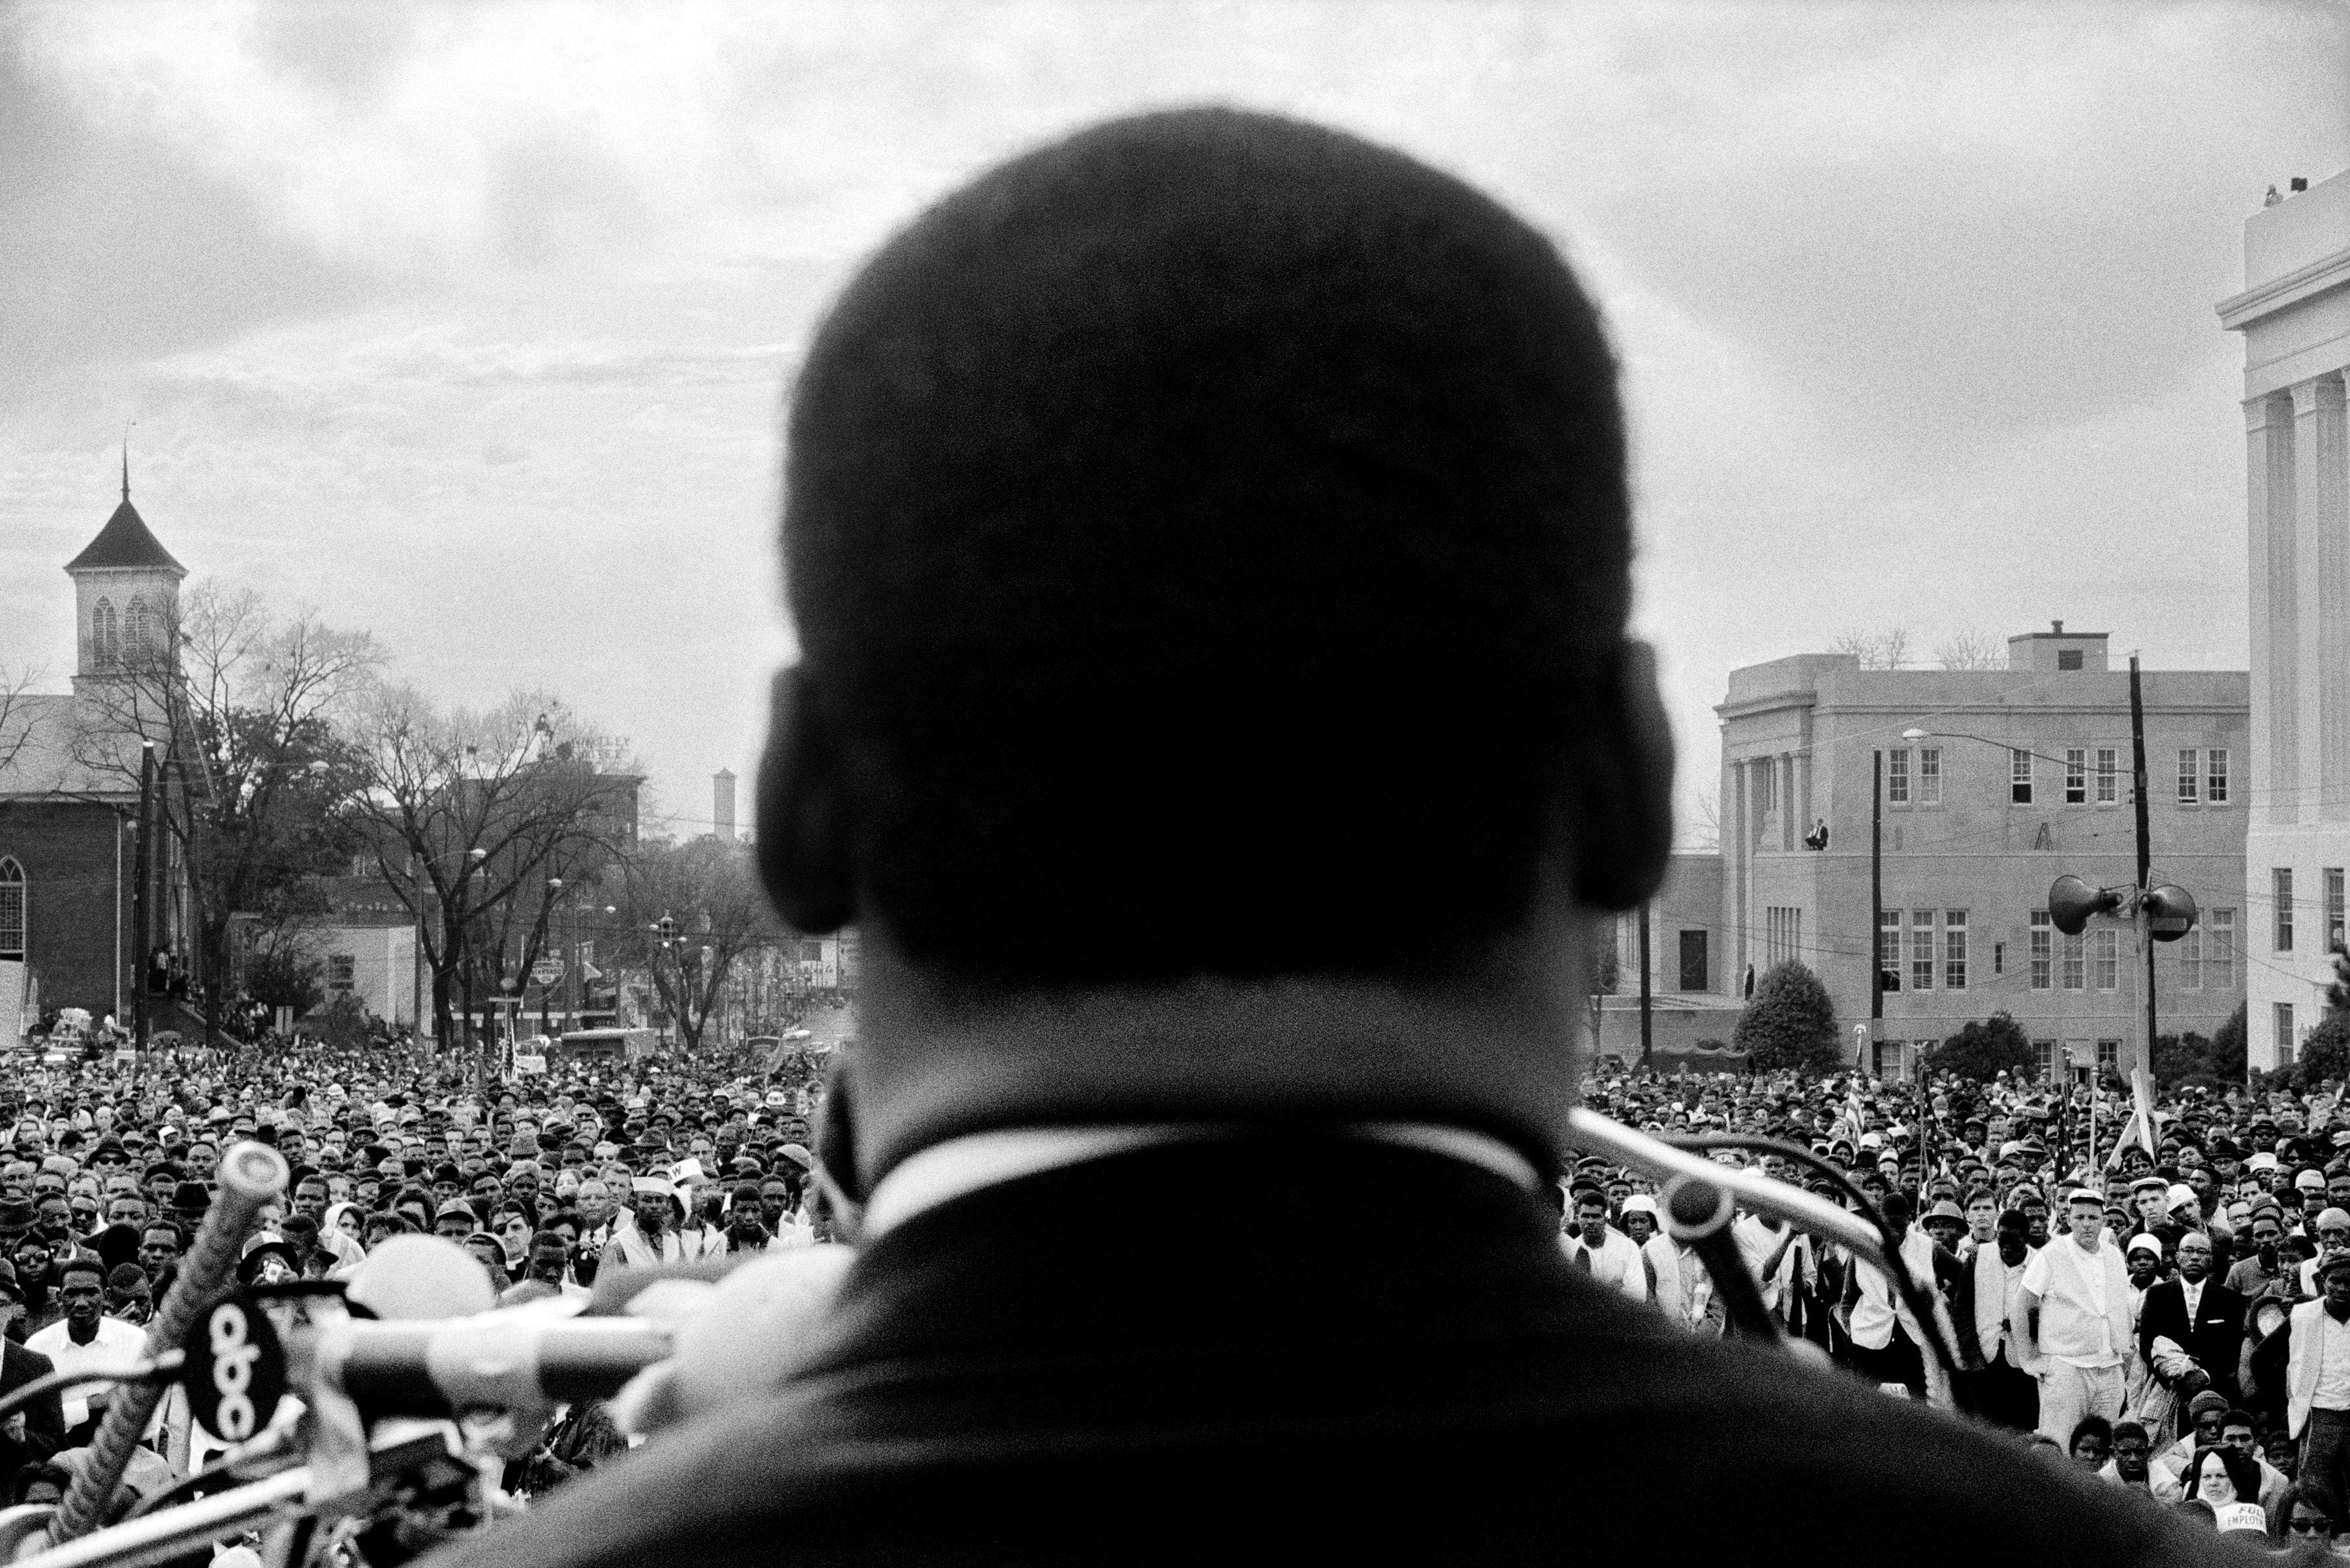 Dr. Martin Luther King, Jr. spoke in front of 25,000 civil rights marchers at the conclusion of the Selma to Montgomery march in front of Alabama state capital building on March 25, 1965 in Montgomery, Ala. (Stephen F. Somerstein—Getty Images)